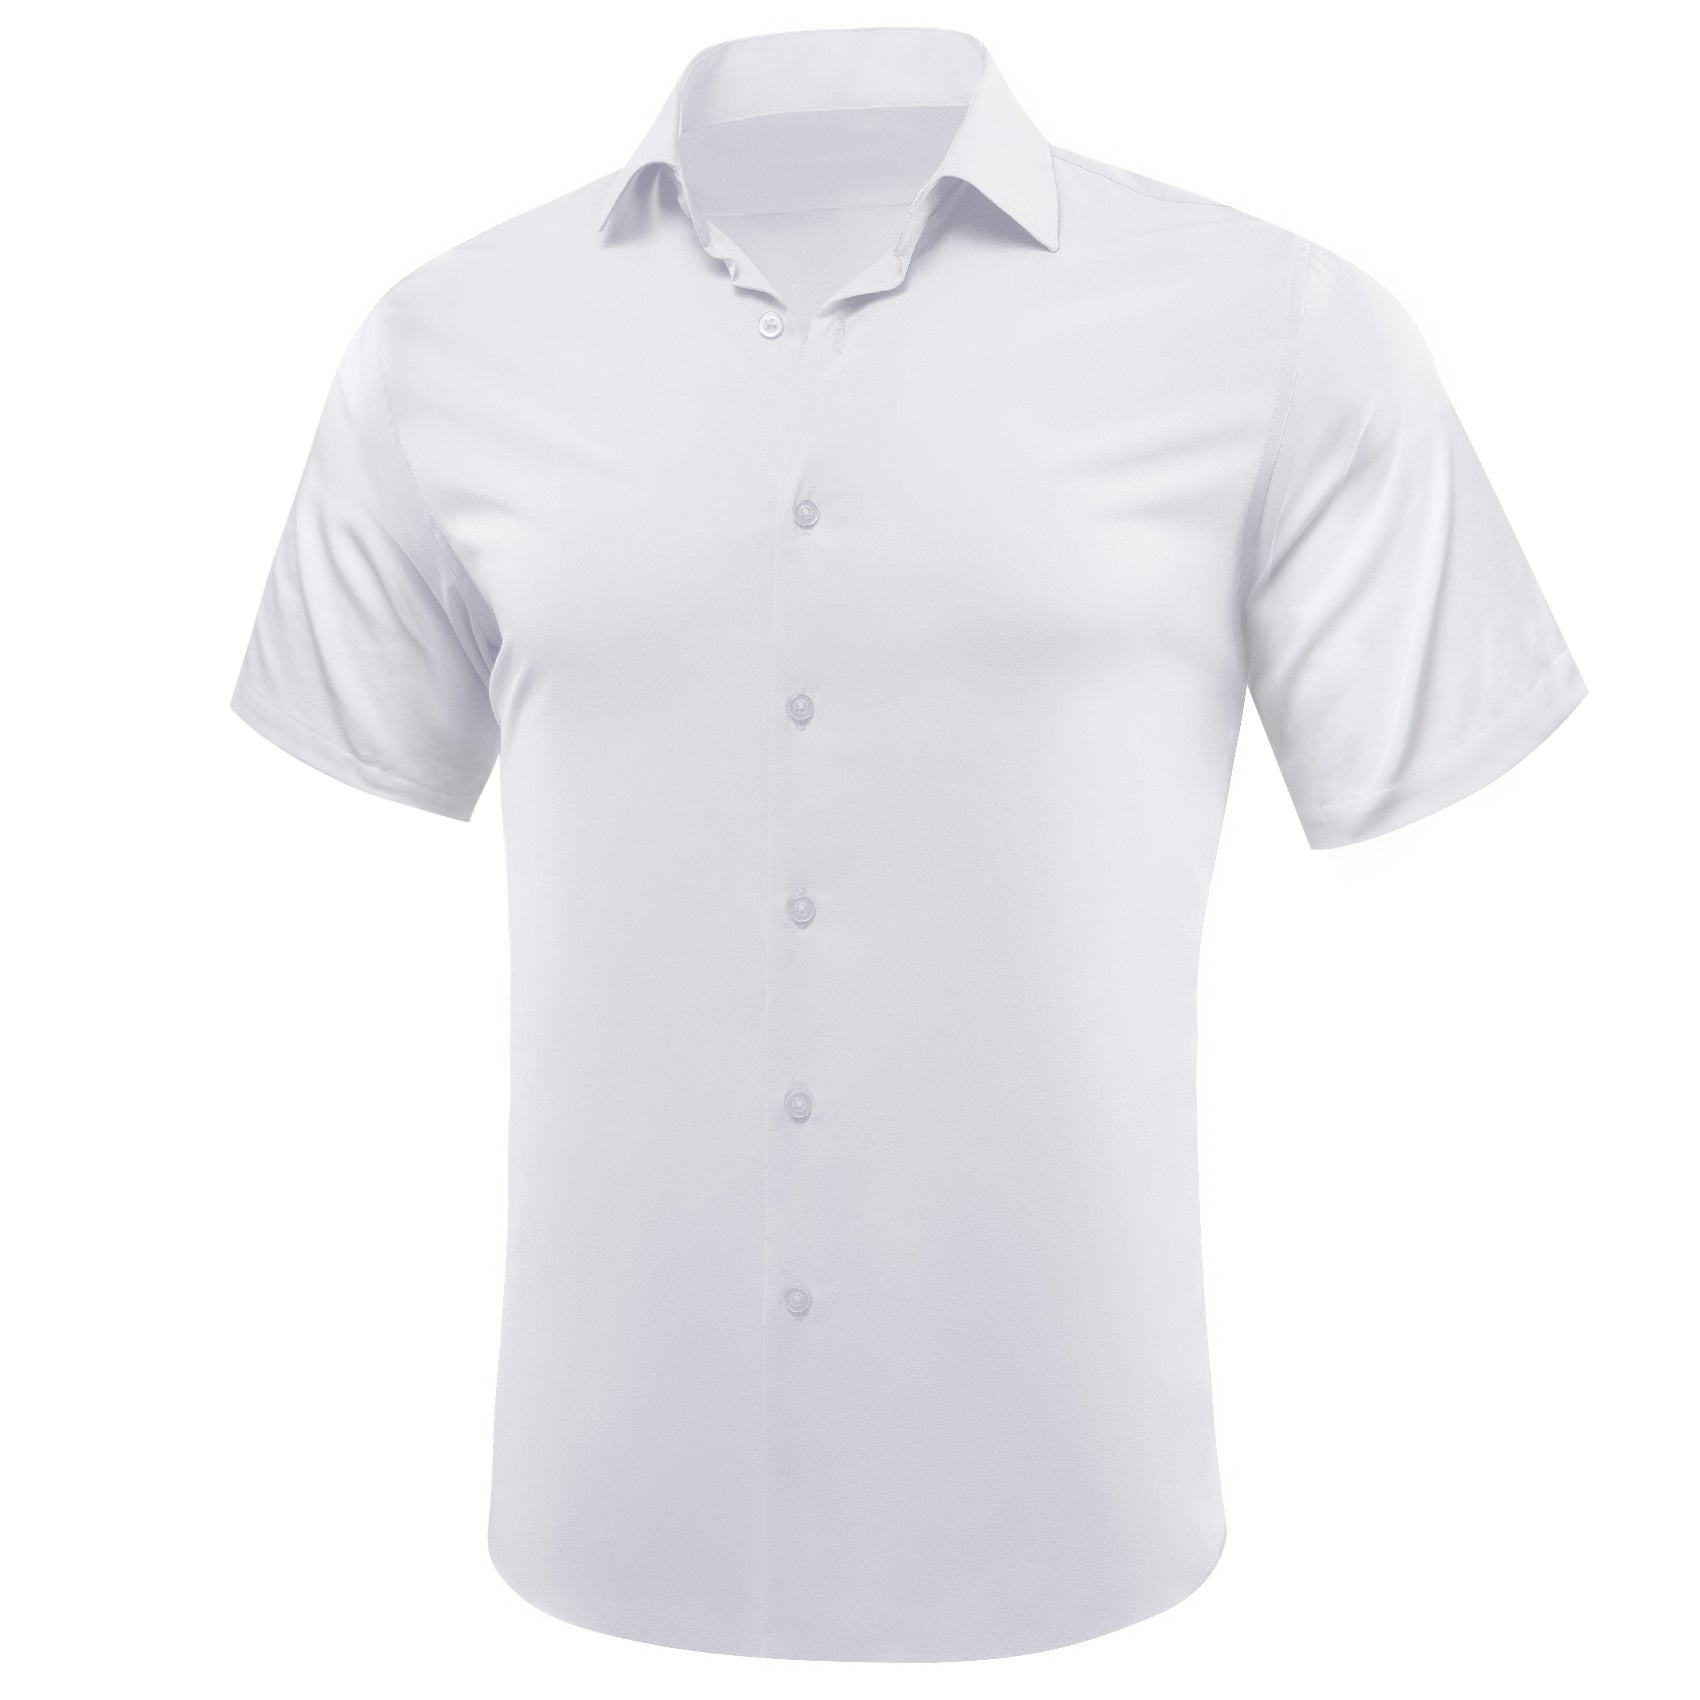 Barry.wang White Solid Short Sleeves Shirt